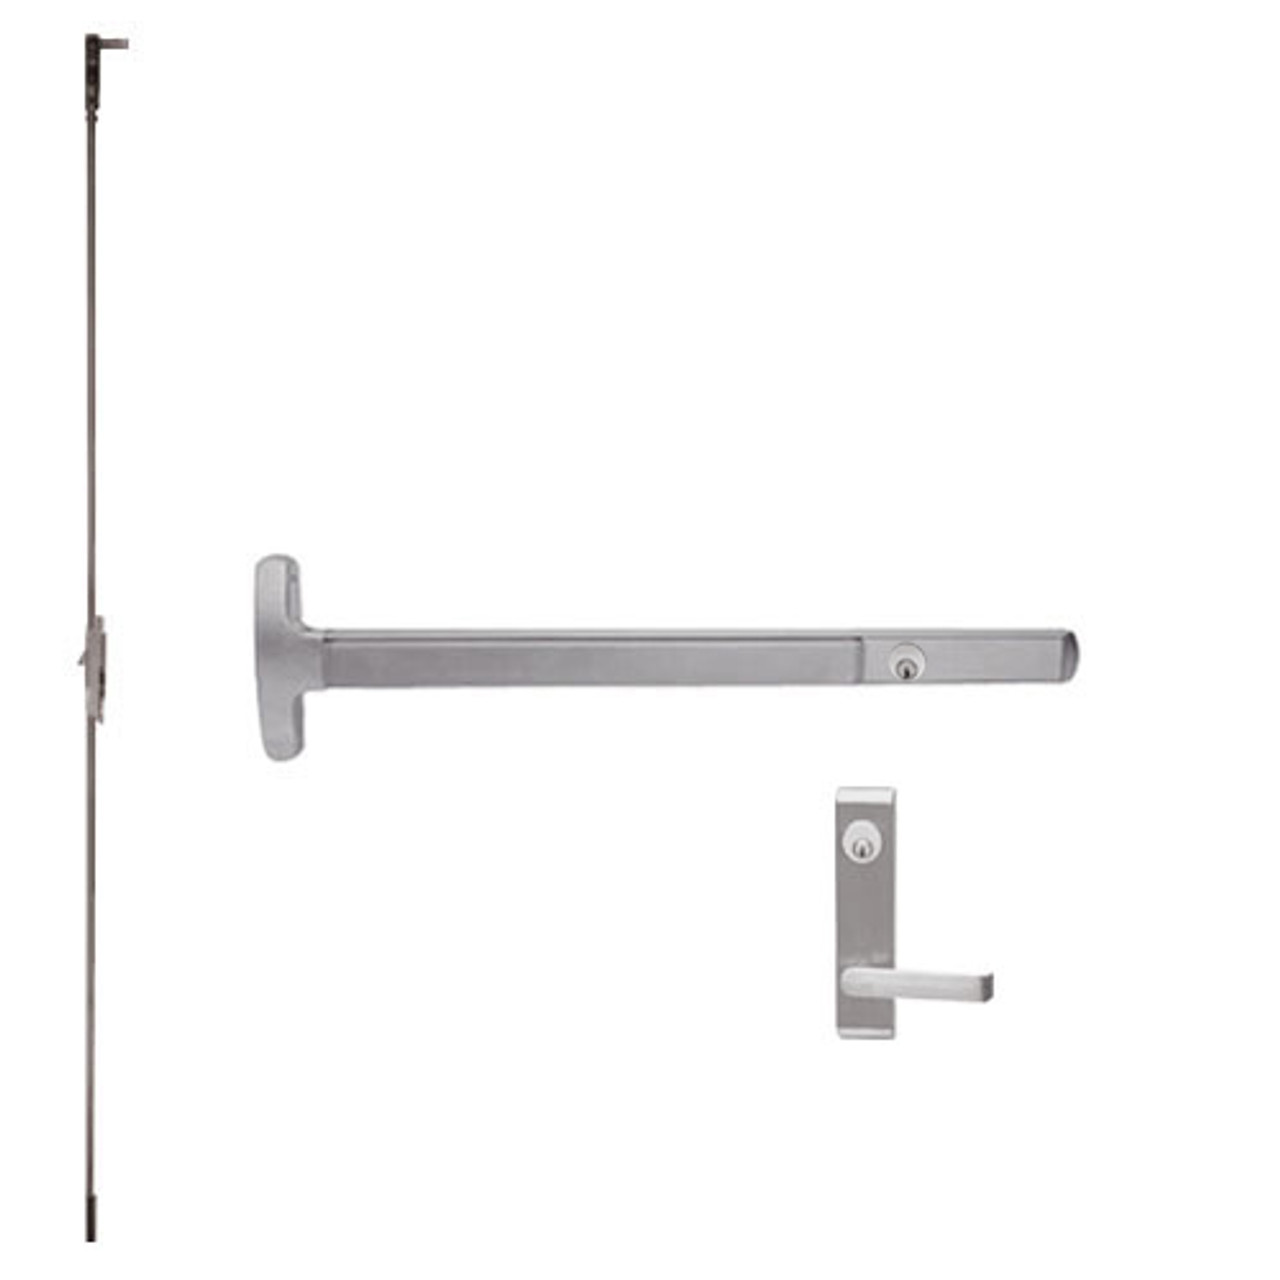 CD24-C-L-DANE-US32D-2-RHR Falcon Exit Device in Satin Stainless Steel